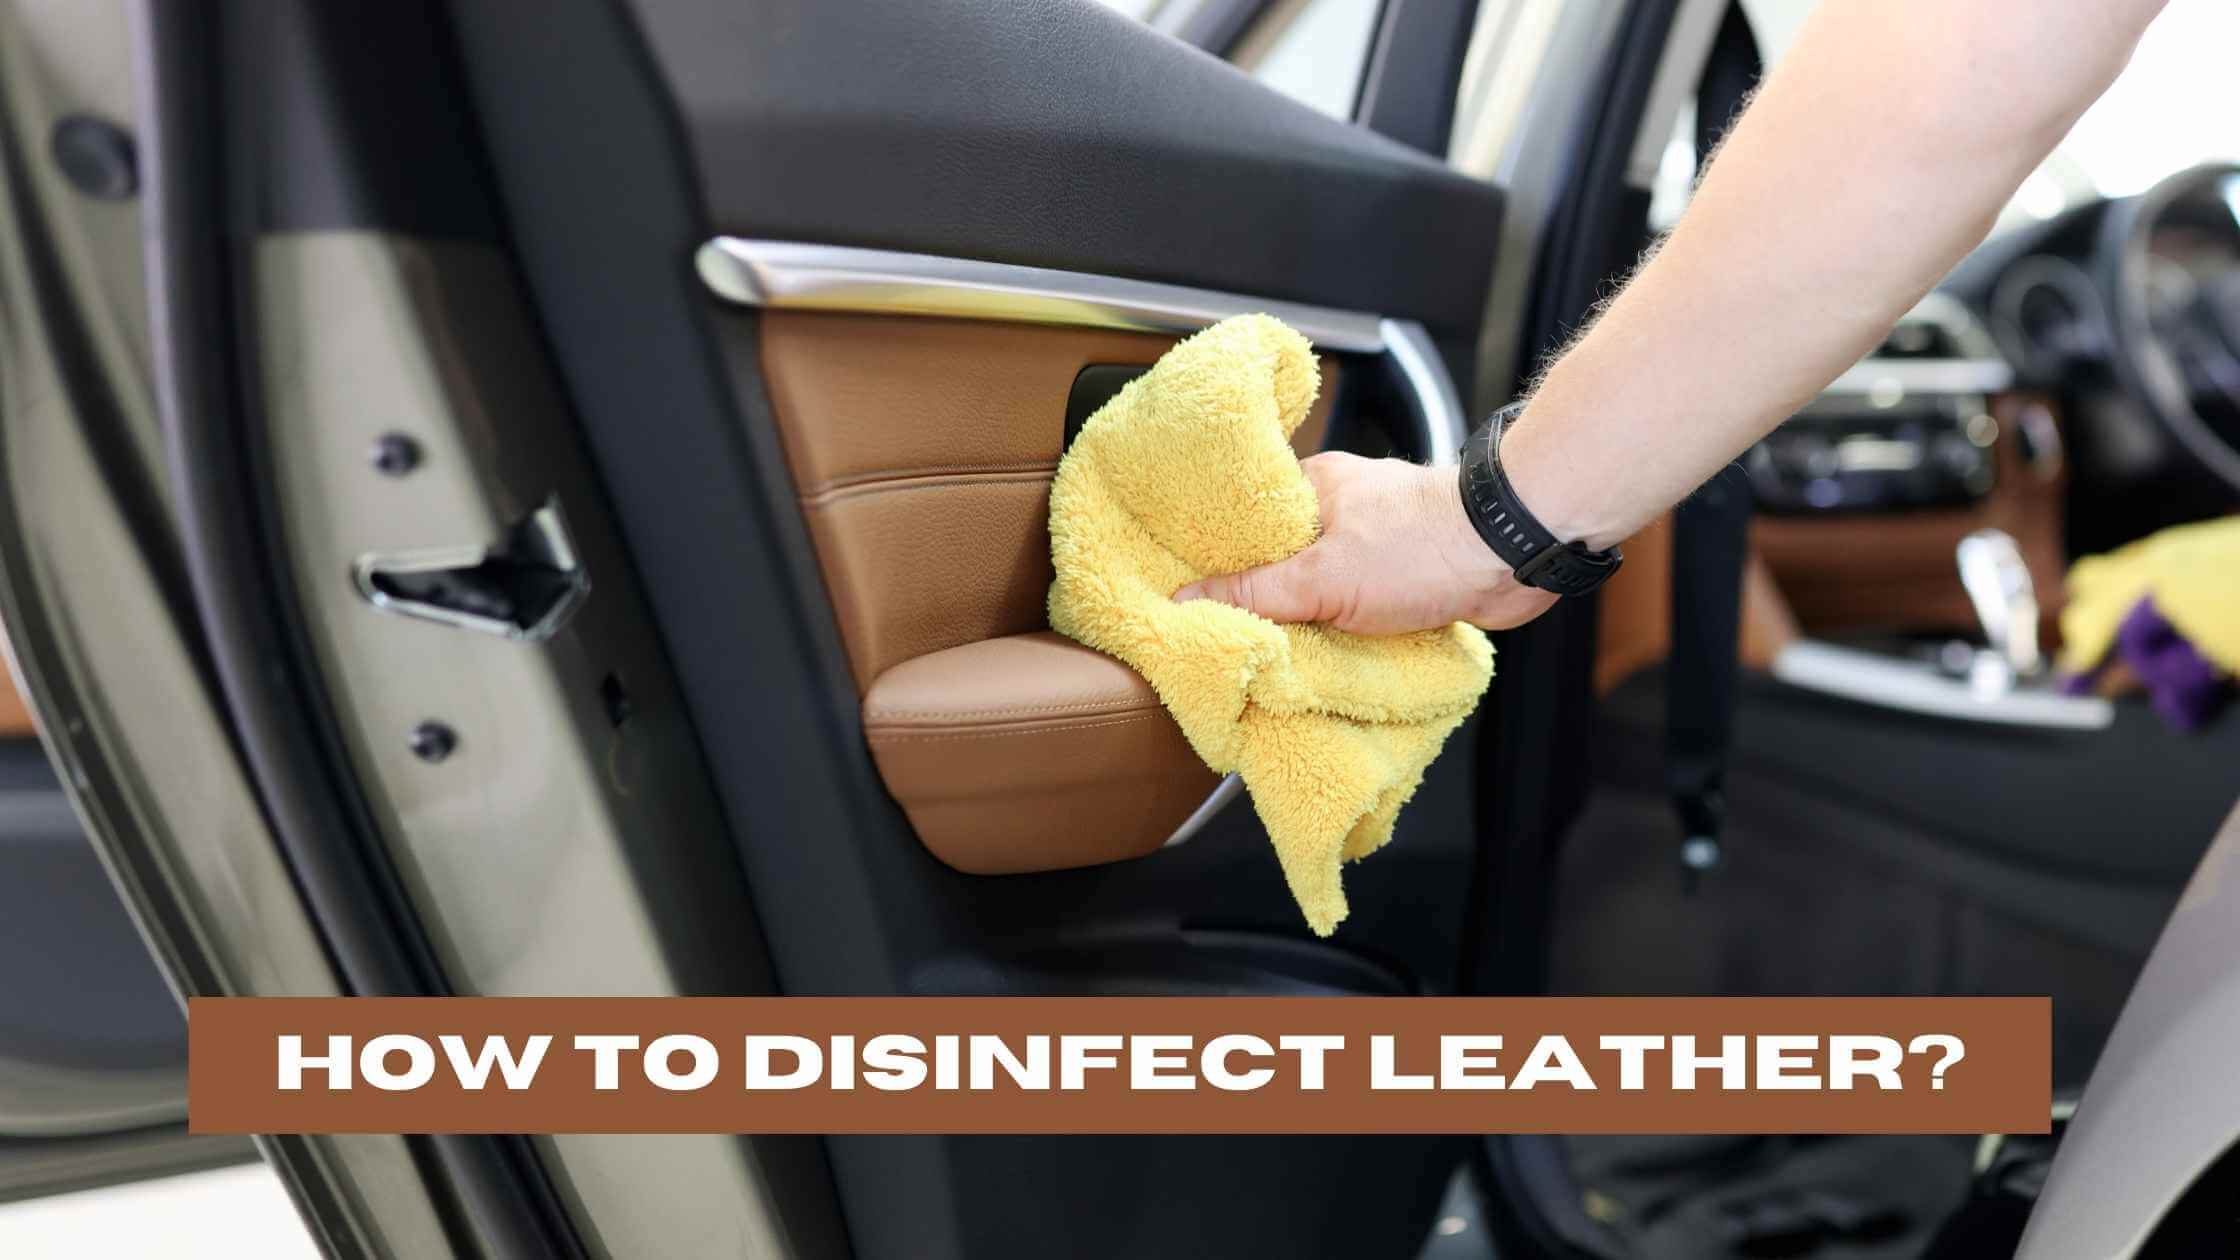 How to Disinfect Leather